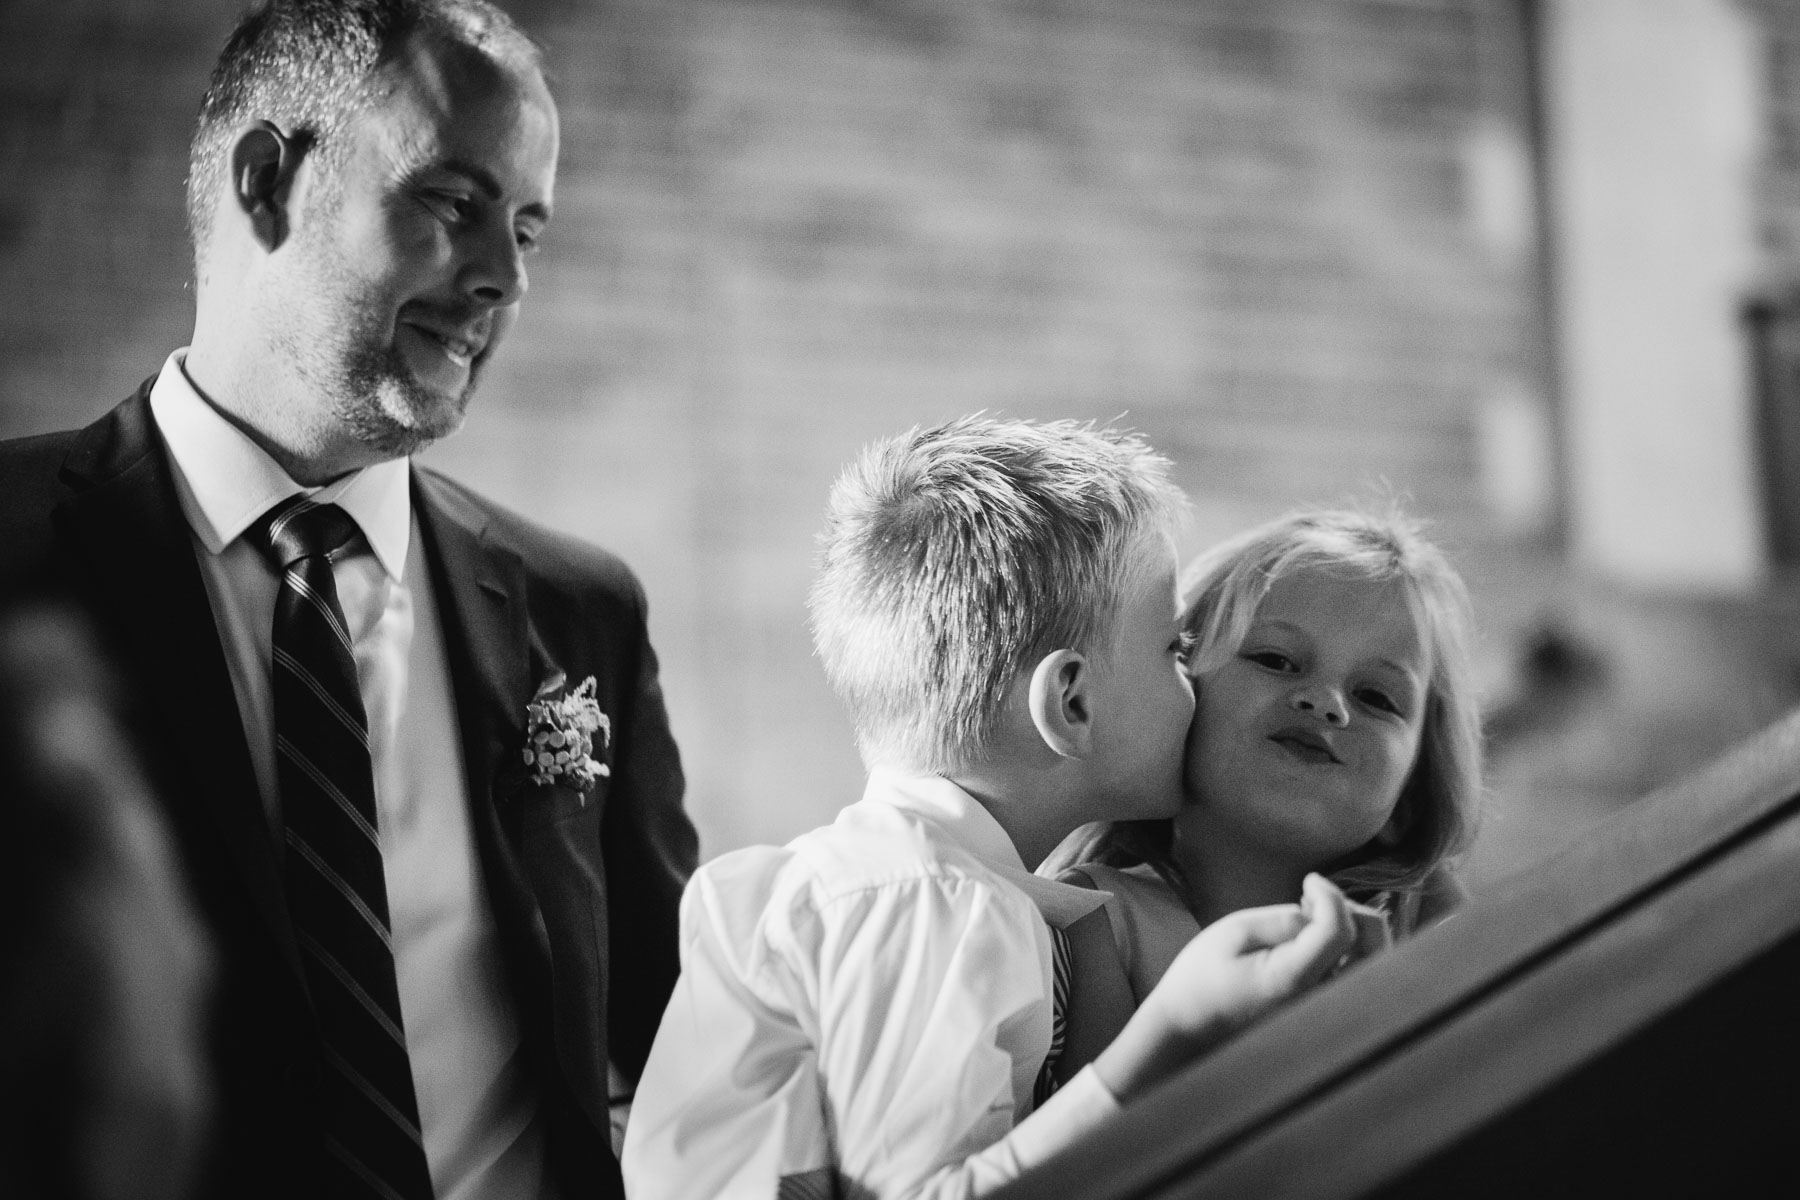 A boy kisses a girl on the cheek and she smiles towards the camera and the groom watches in this Hart House wedding photo.